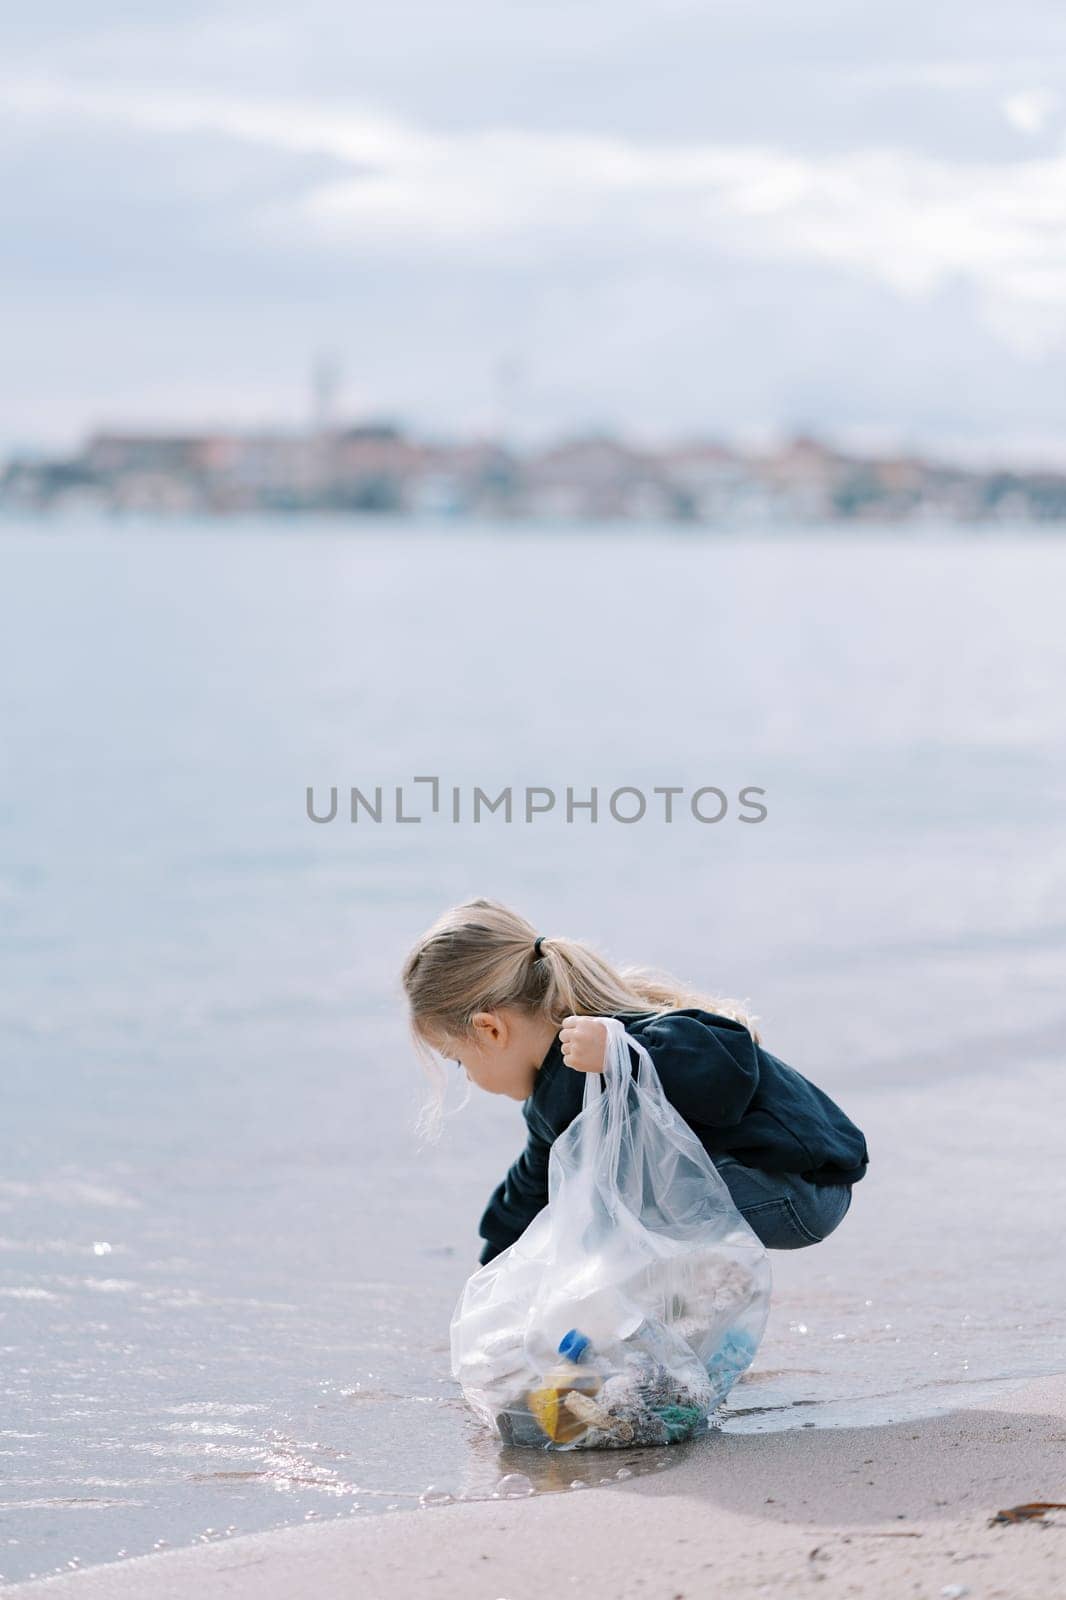 Little girl with a bag squats by the sea and collects garbage by Nadtochiy